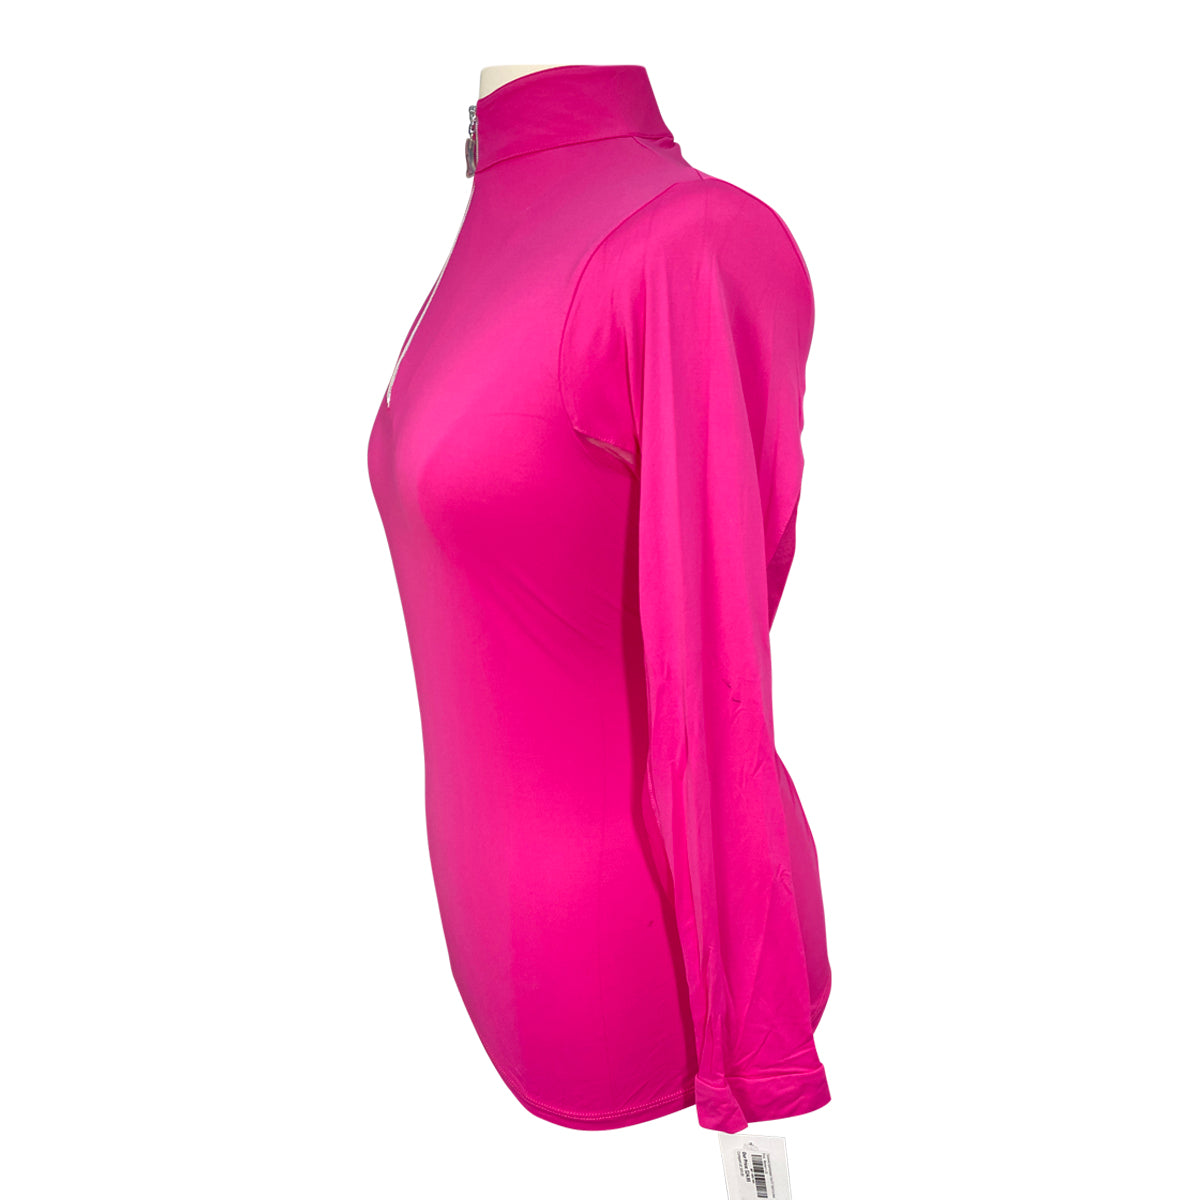 Tailored Sportsman 'Ice Fil' Shirt in Hot Pink